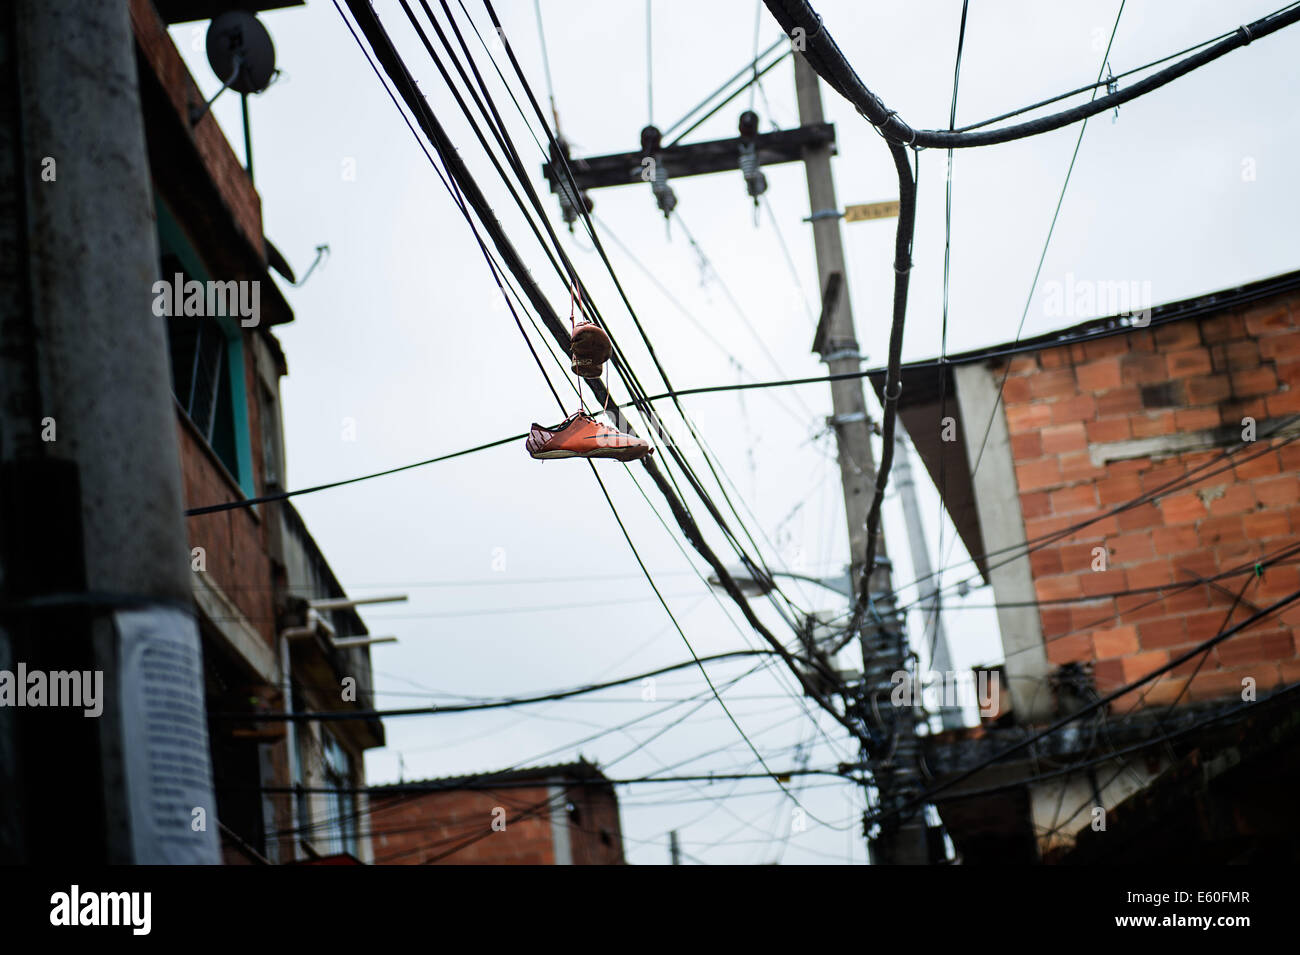 Rio De Janeiro, RJ, Brazil. 8th Aug, 2014. Old shoes hanging from  electrical wires in Complexo do Alemao. Residents are protesting for peace  in the favela and against the shootings that have